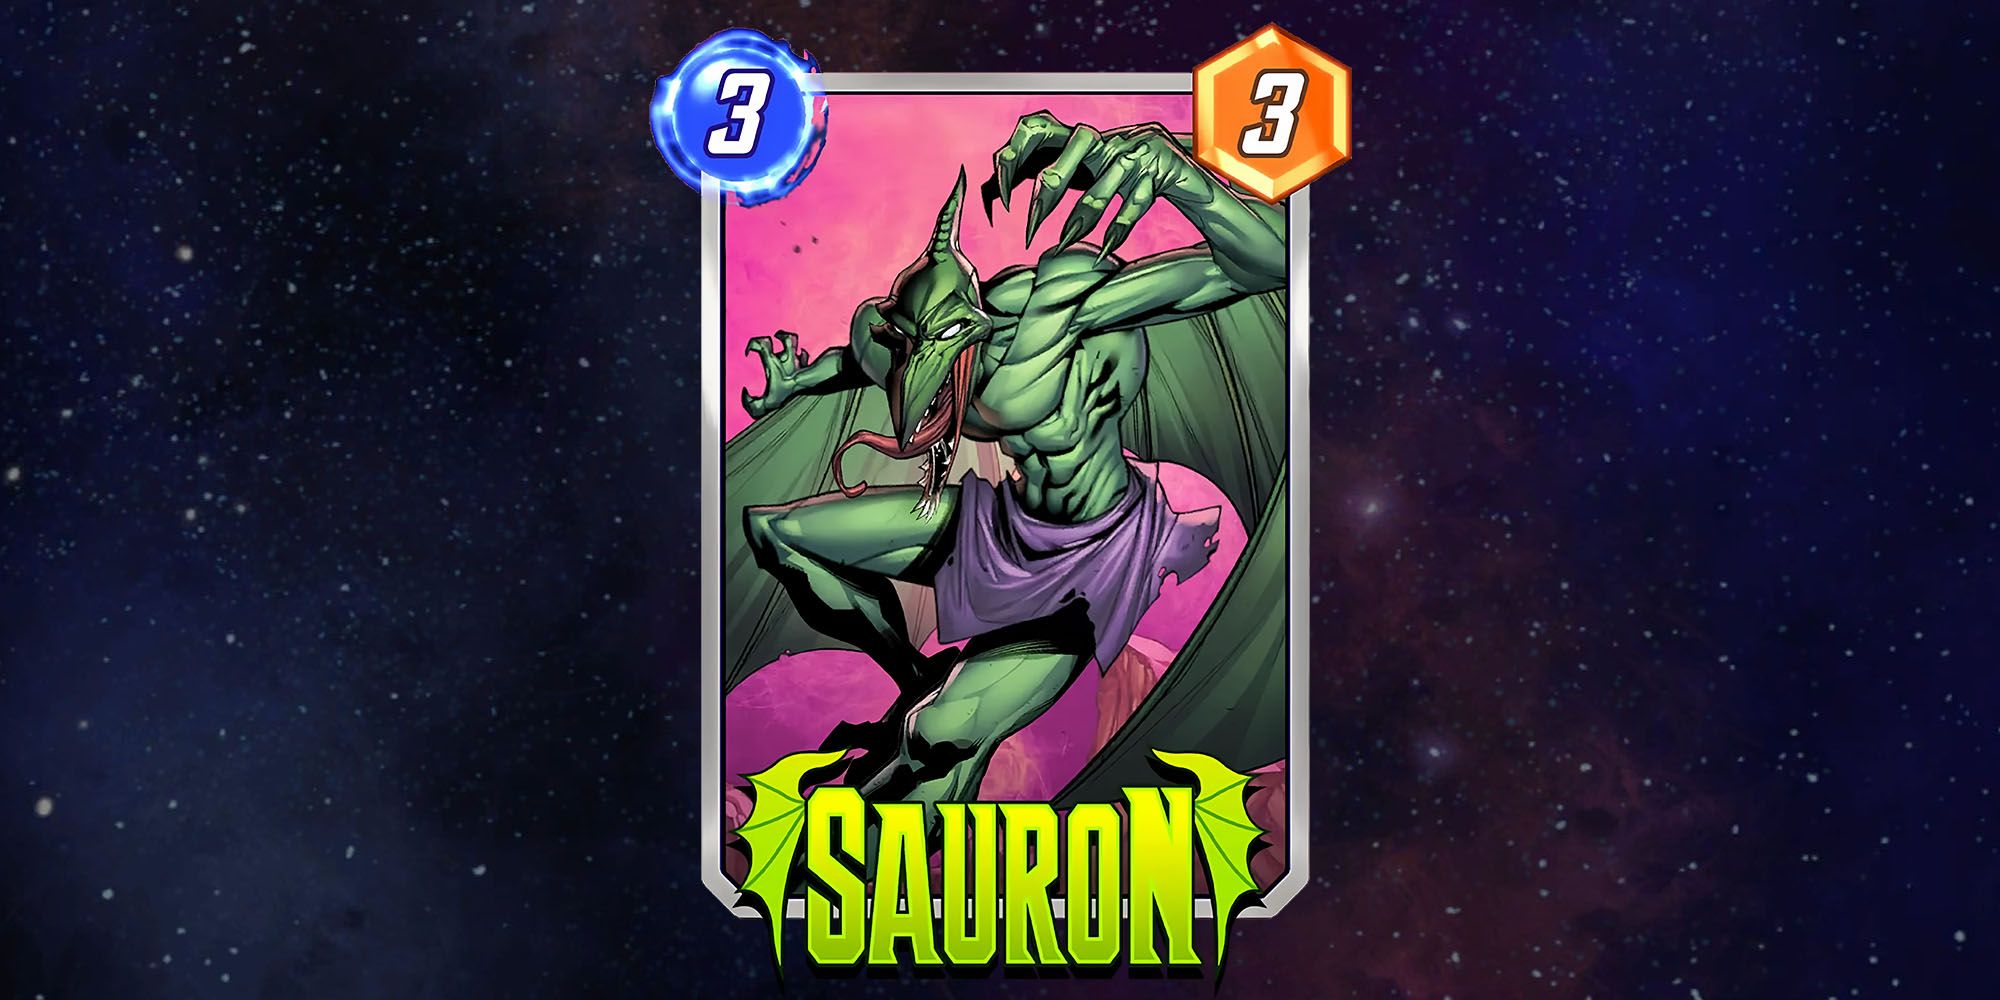 The new Sauron card in Marvel SNAP.